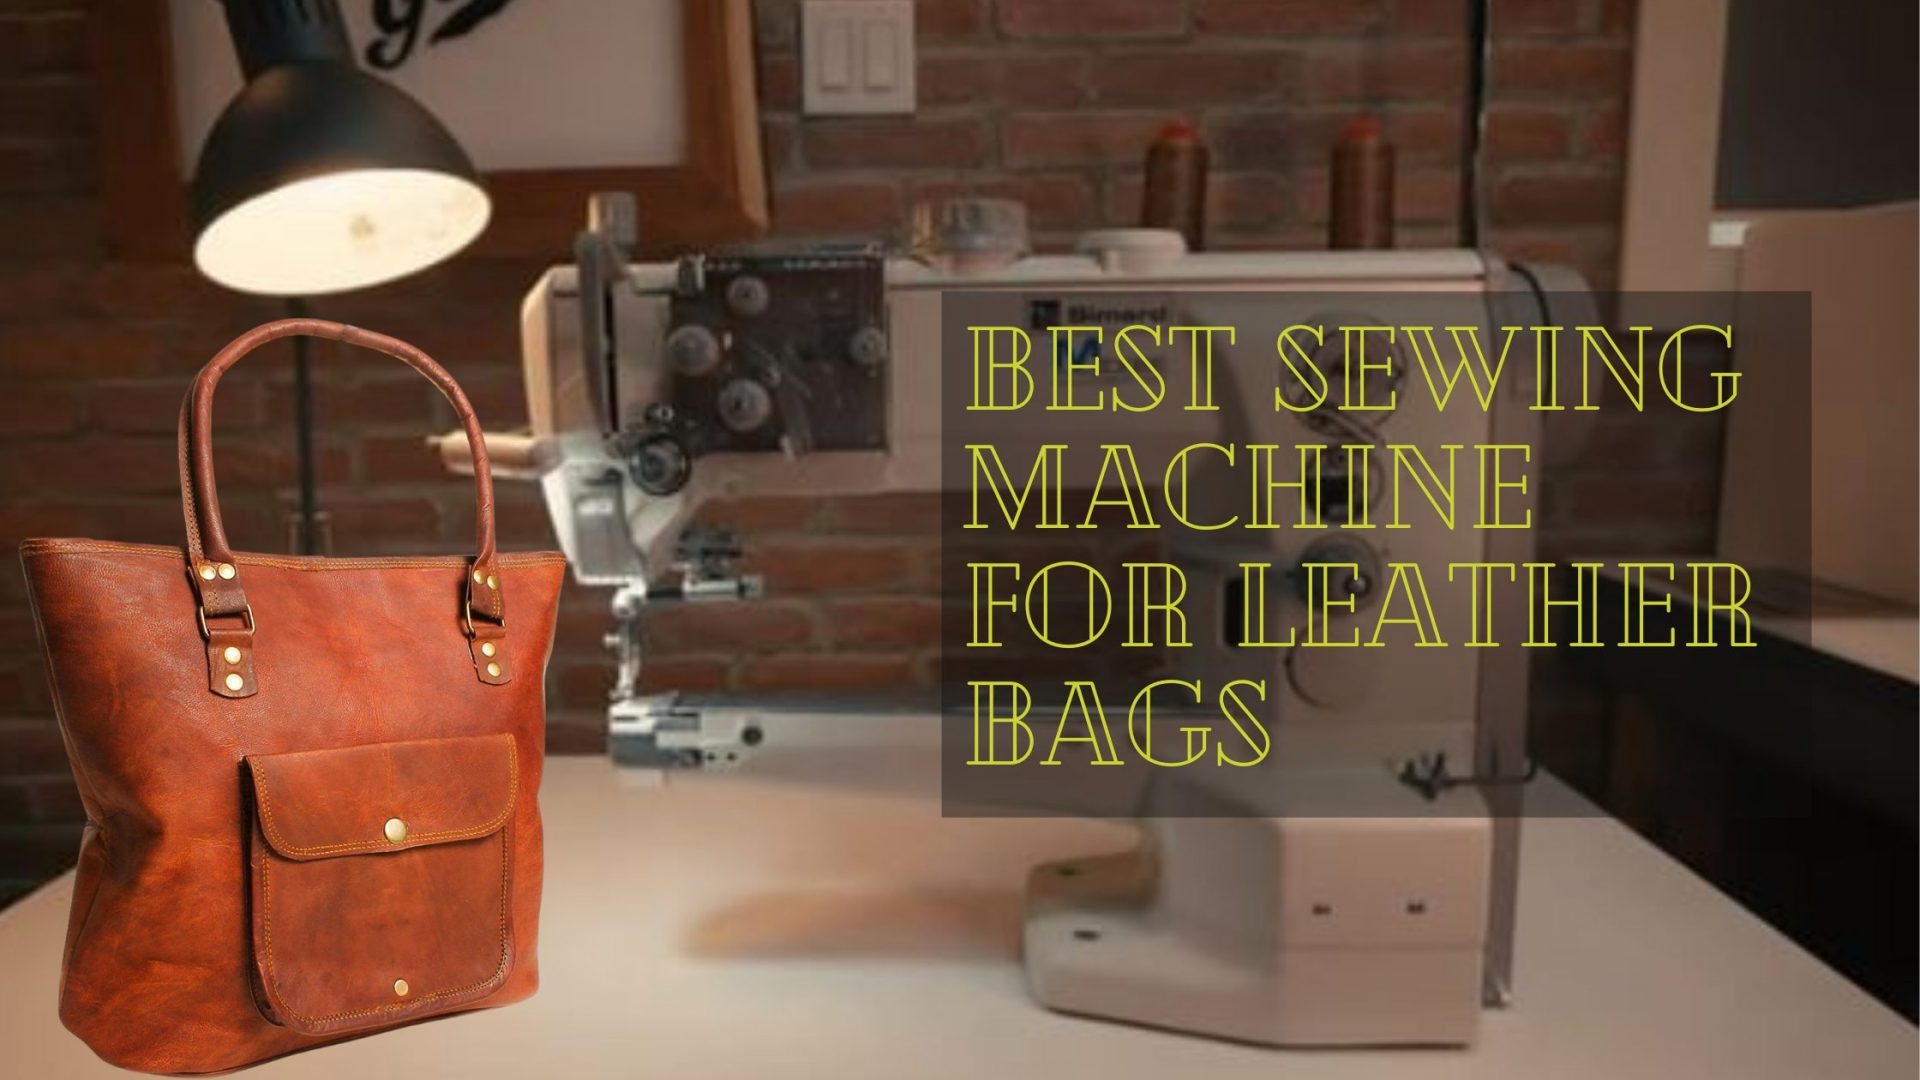 Best Sewing Machine for Leather Bags